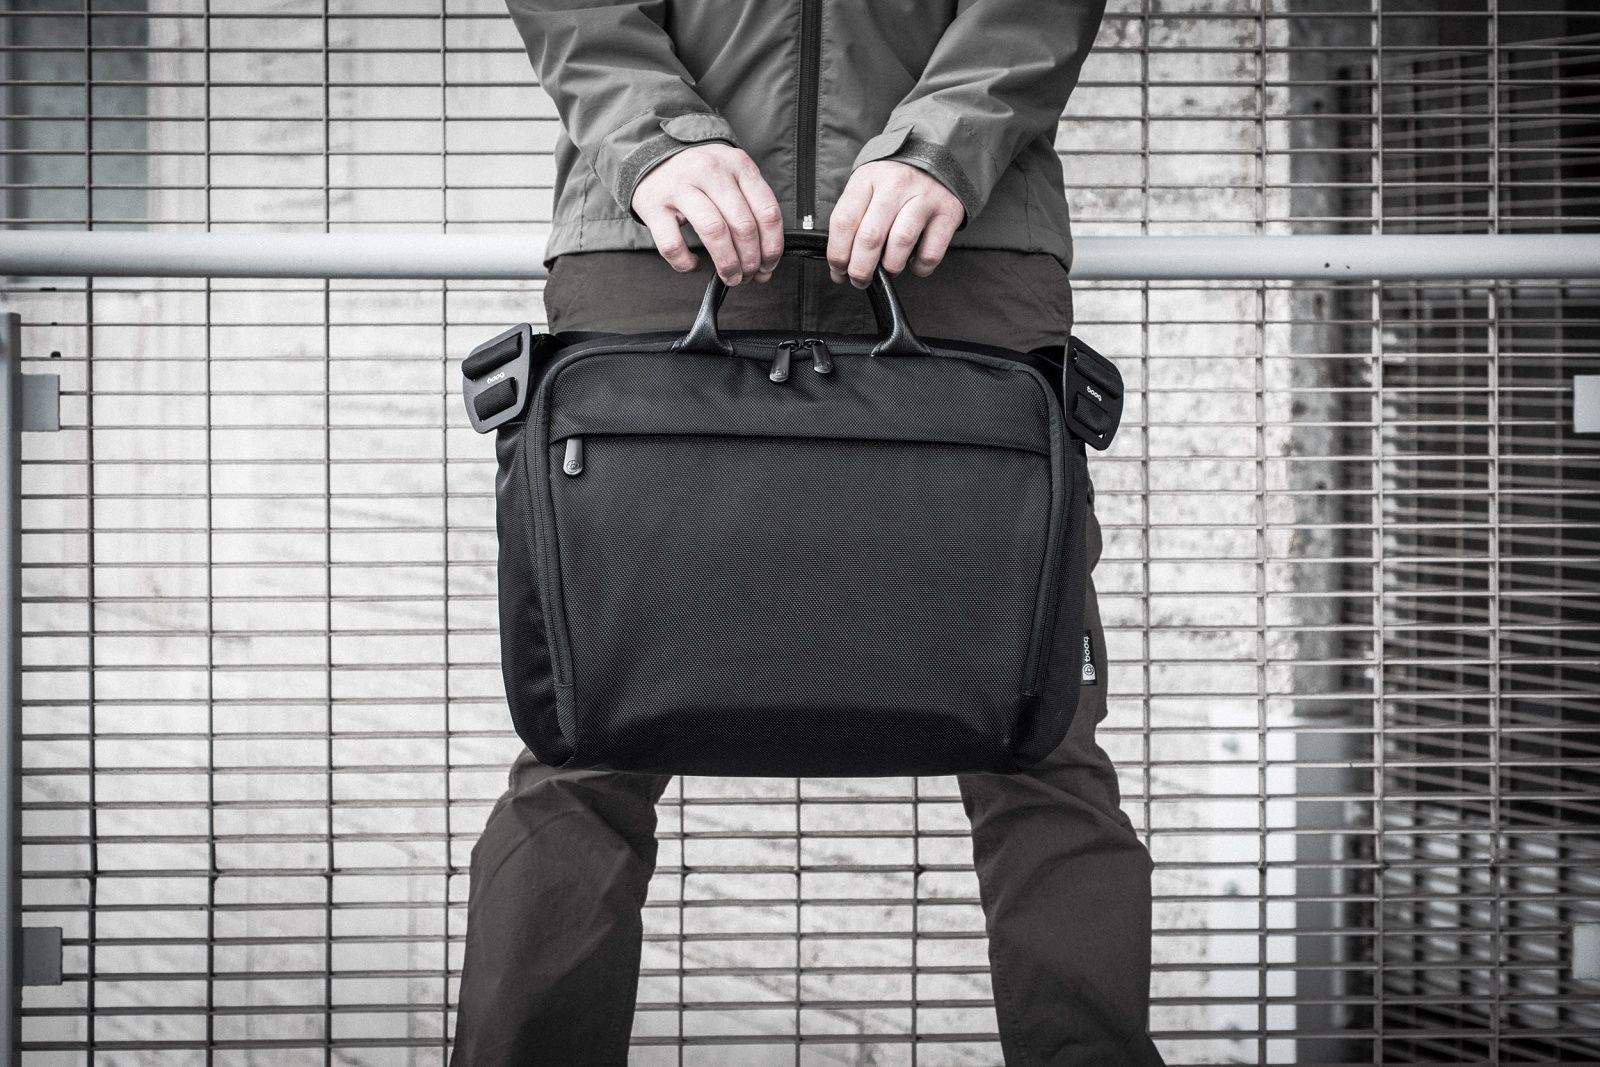 The new Boa saddle bag by Booq is designed to carry the 15-inch MacBook Pro.